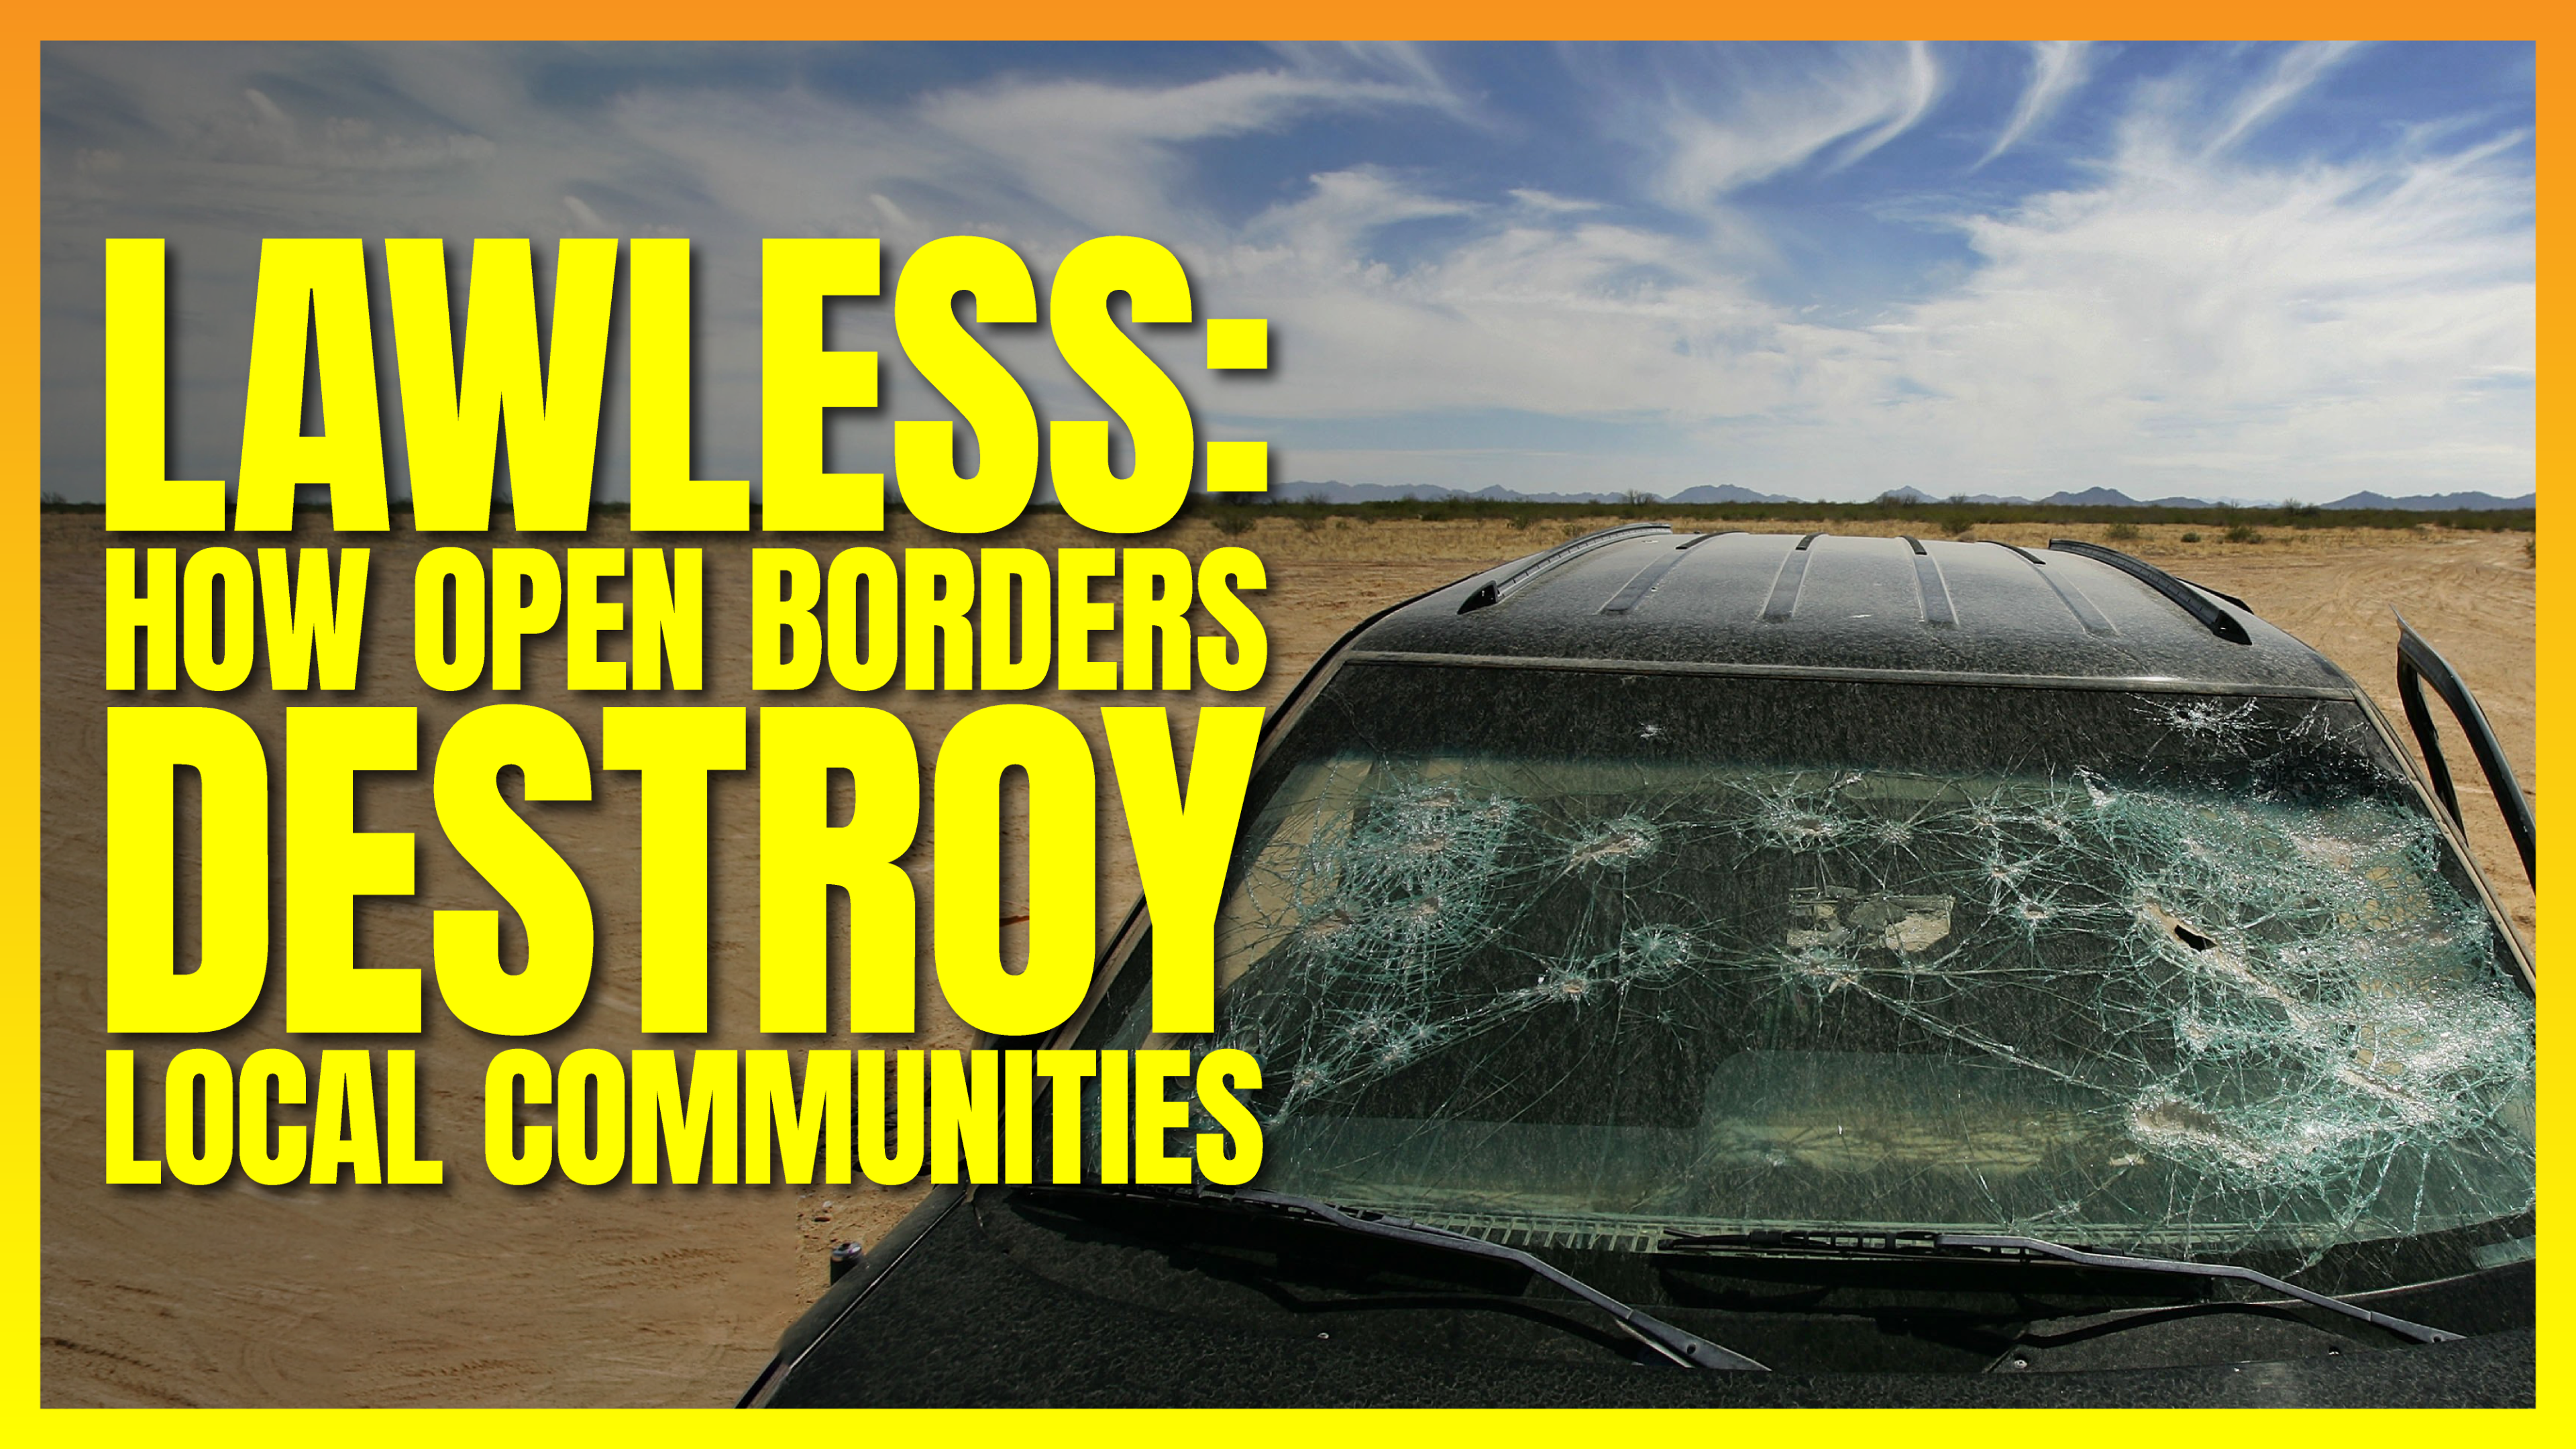 Lawless: How Open Borders Destroy Local Communities